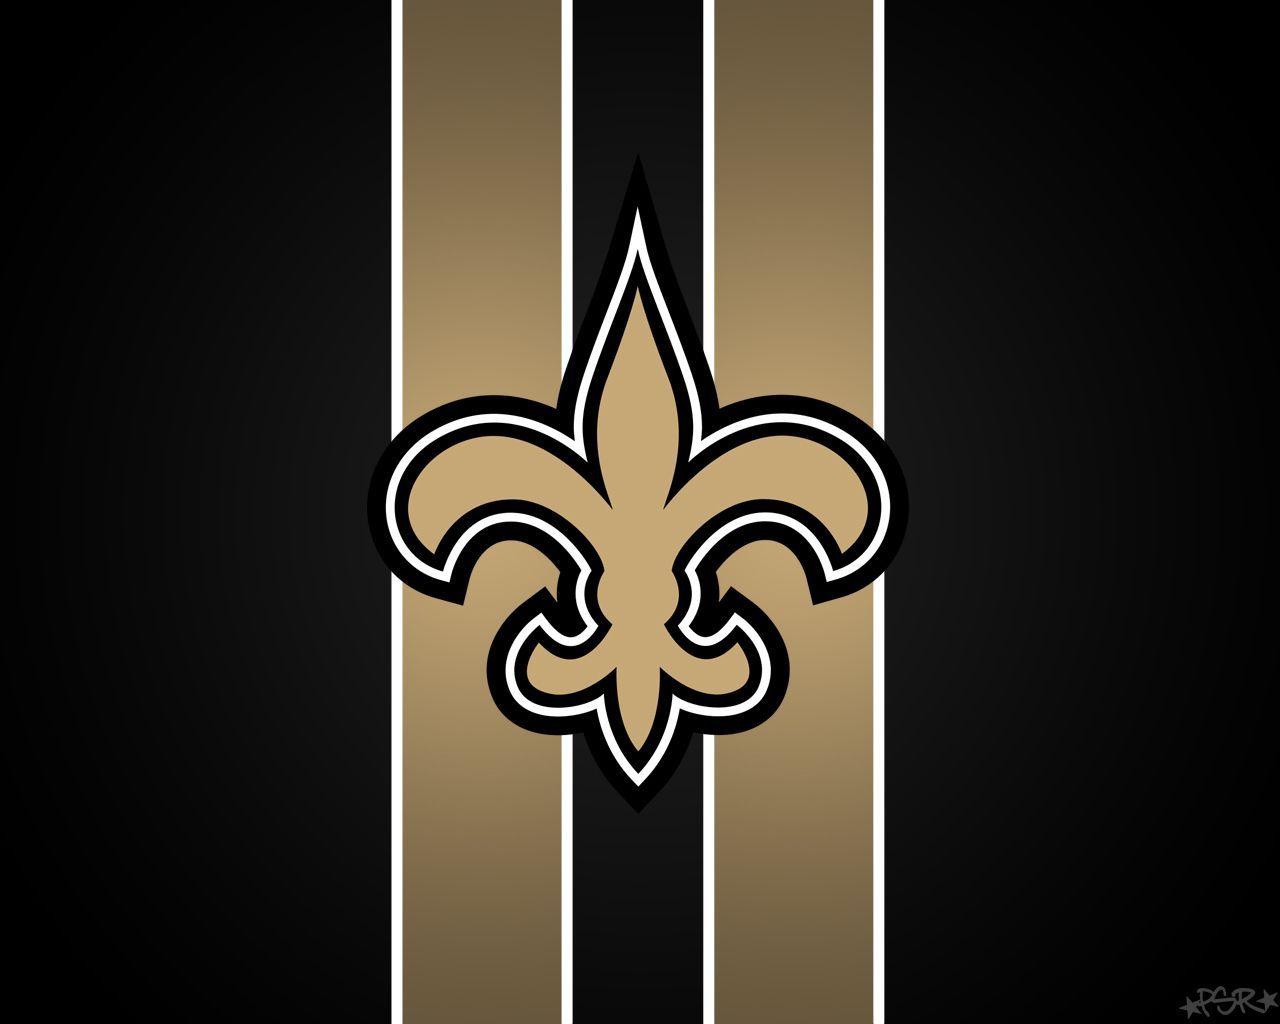 5 New Orleans Saints Wallpapers